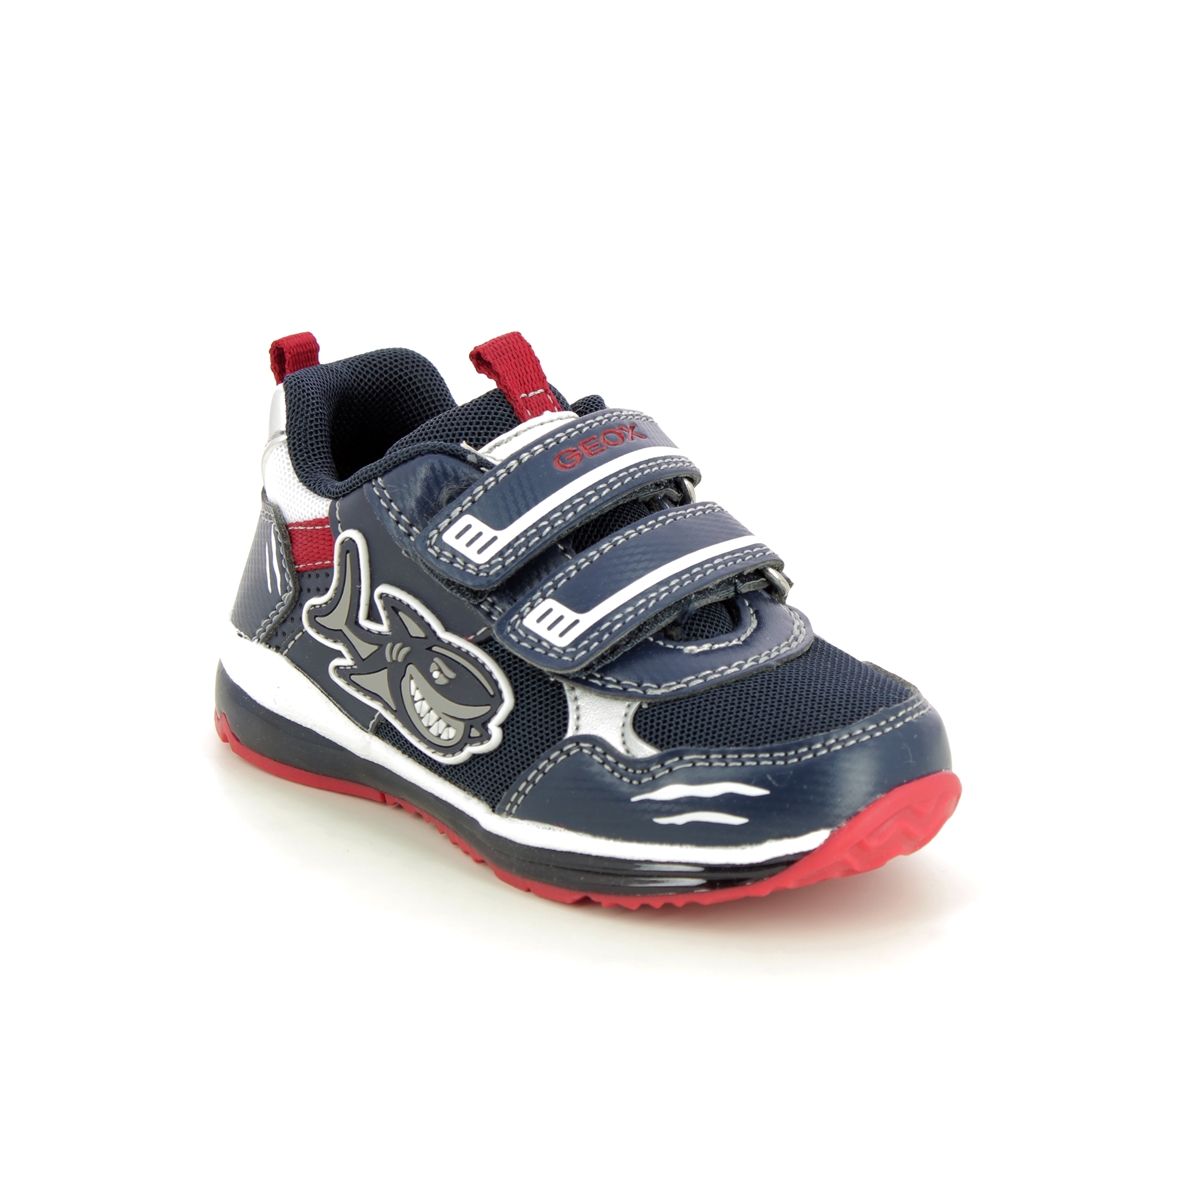 Geox - Todo Shark 2V (Navy Red) B2584A-C0735 In Size 25 In Plain Navy Red For kids